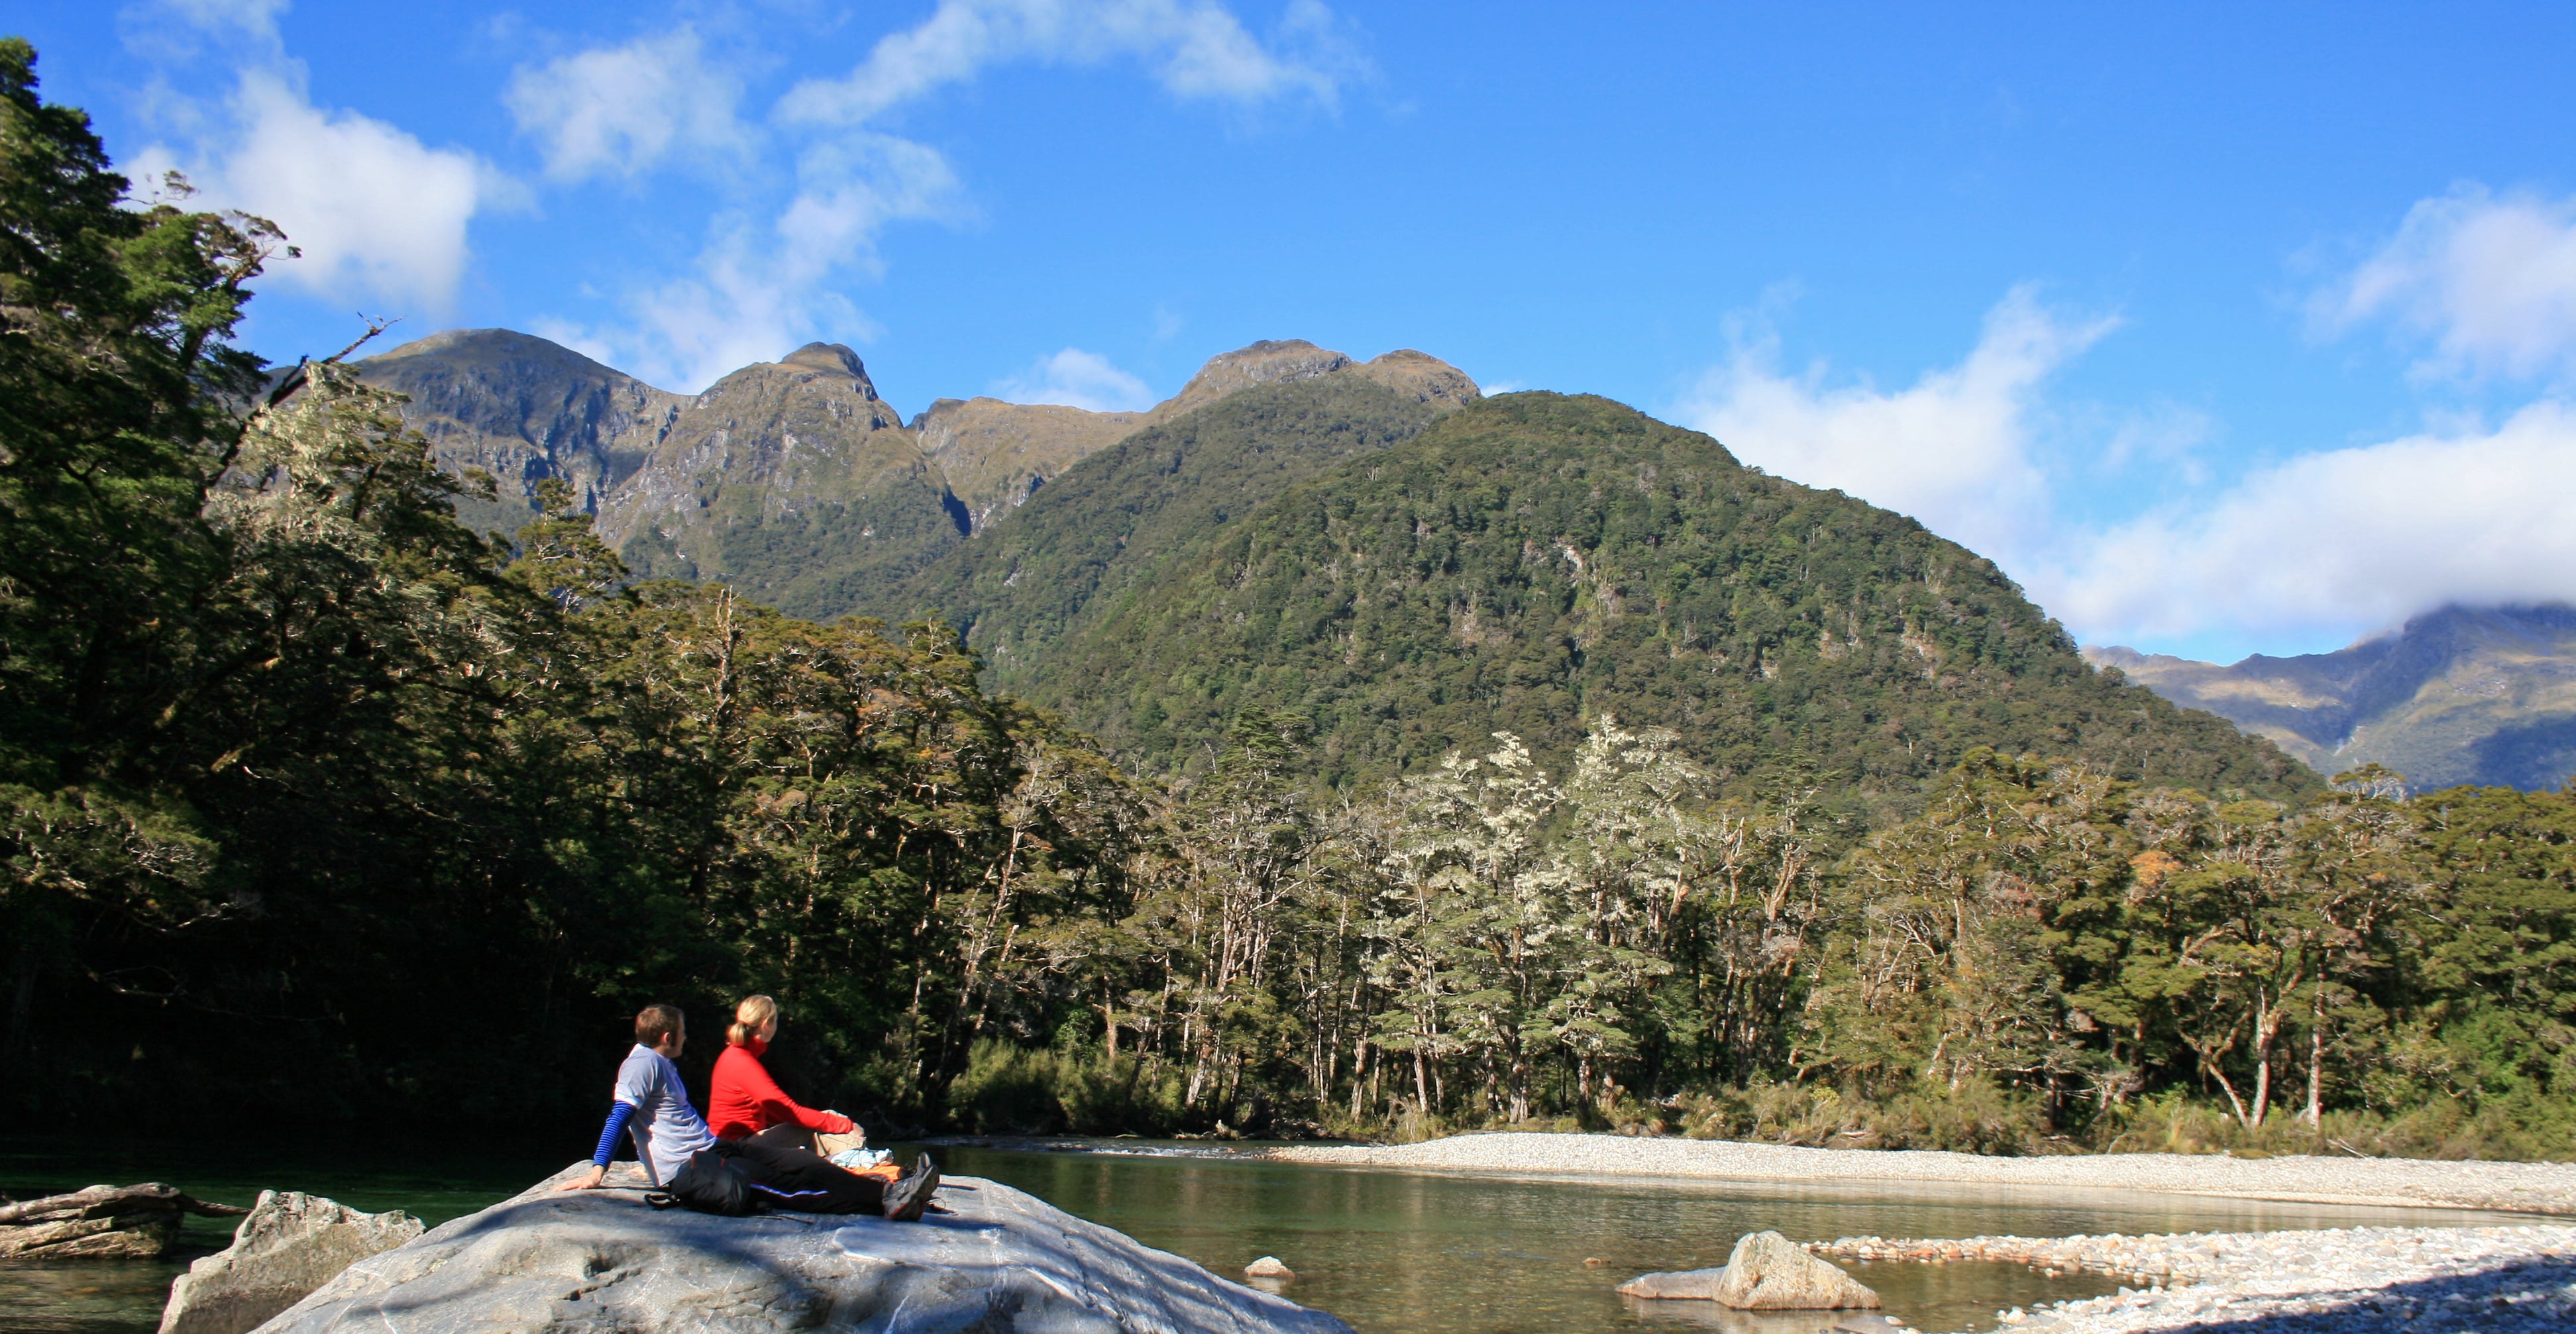 Two walkers sit on a rock on the Milford Track